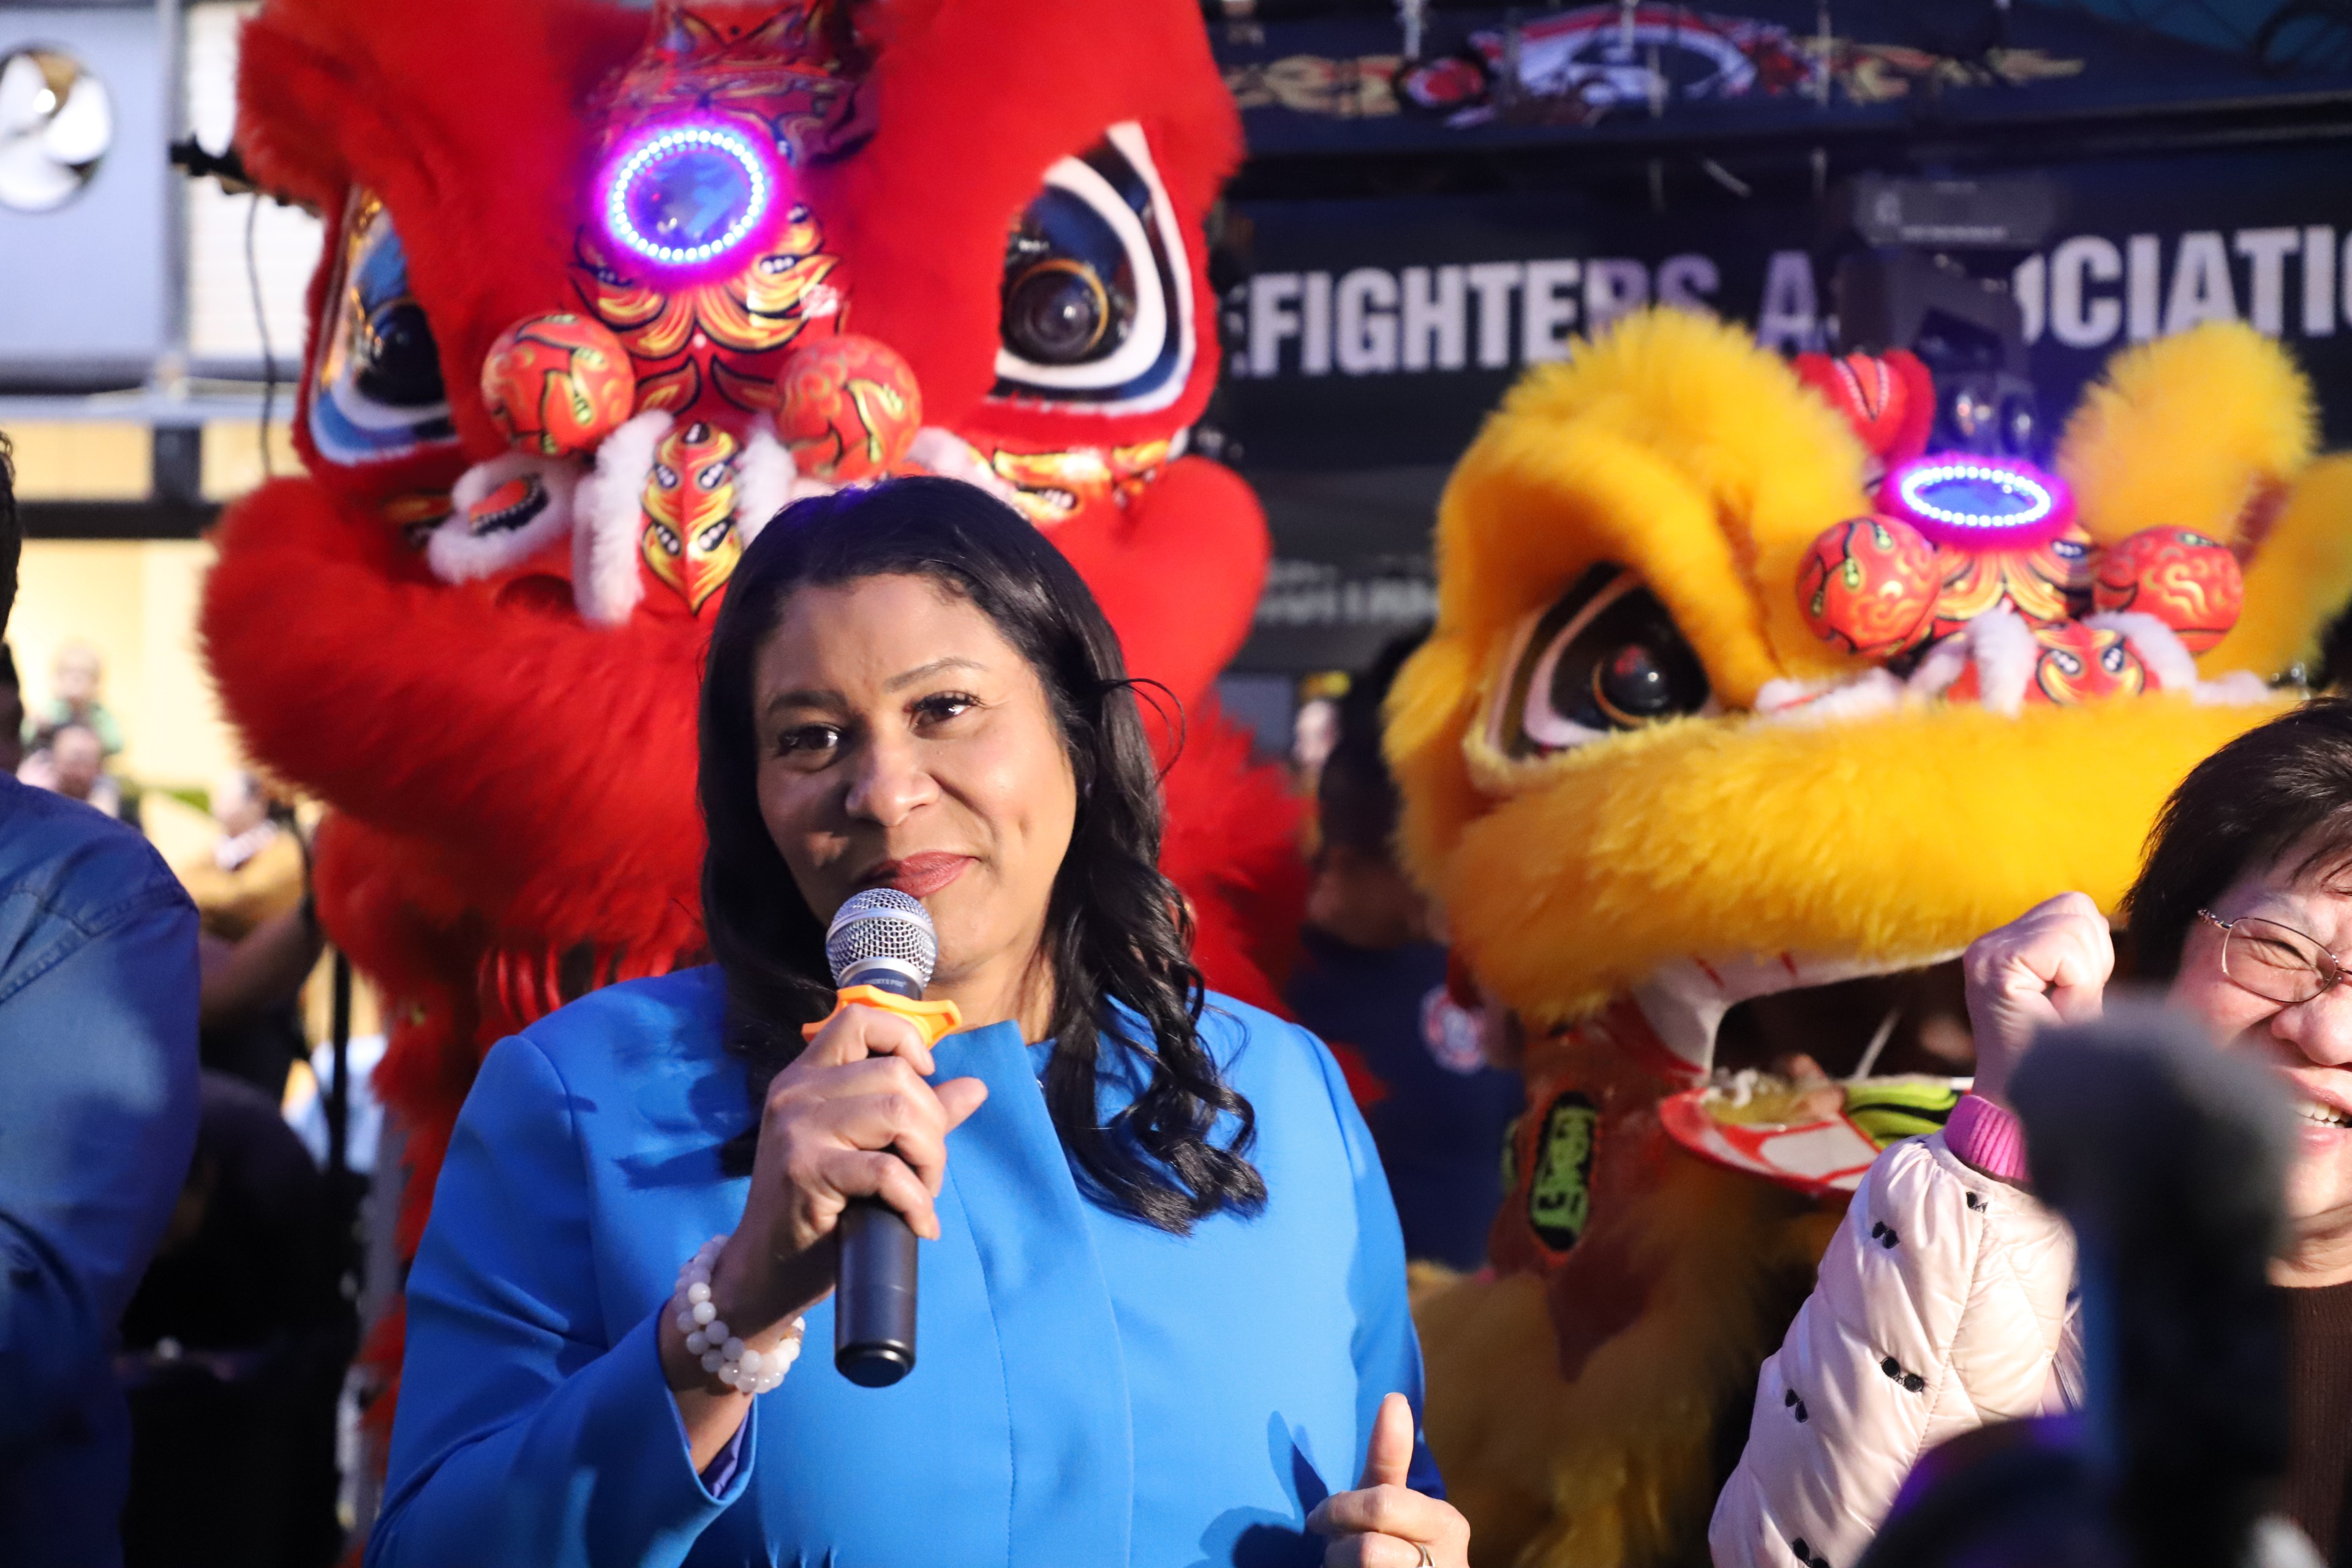 A woman speaks into a mic, smiling, with colorful lion dance costumes behind her.